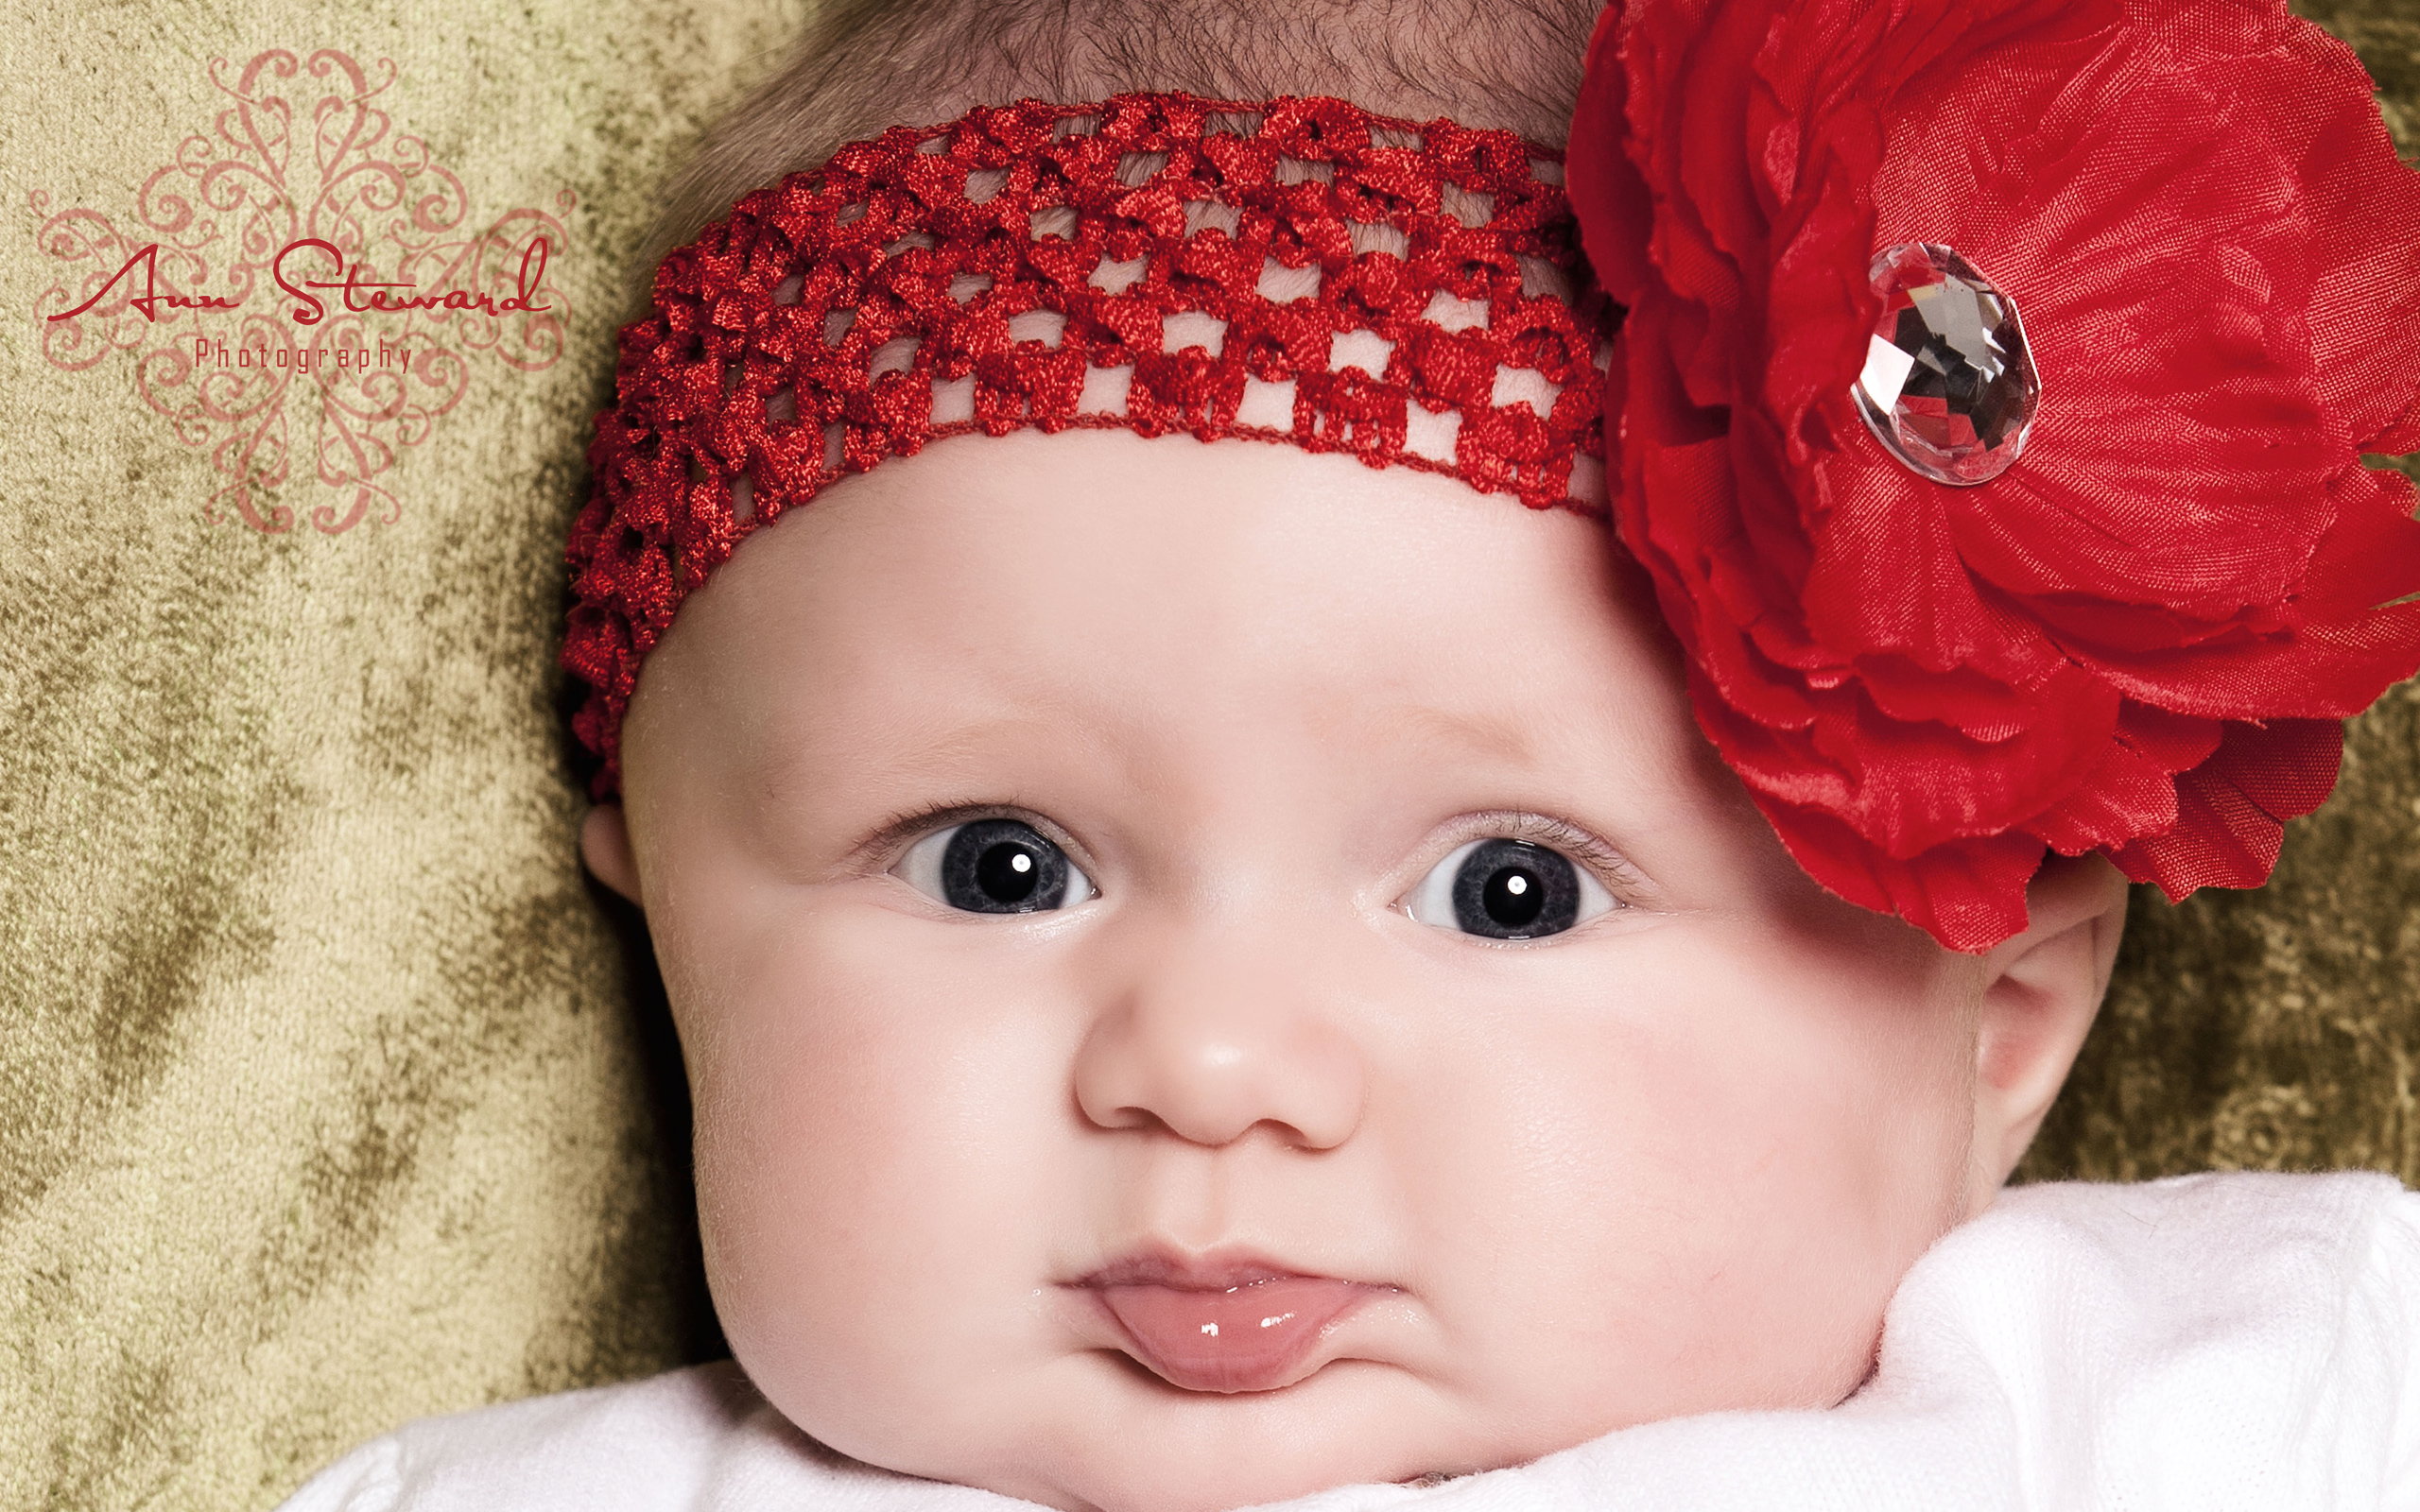 little baby wallpaper,child,baby,clothing,red,hair accessory